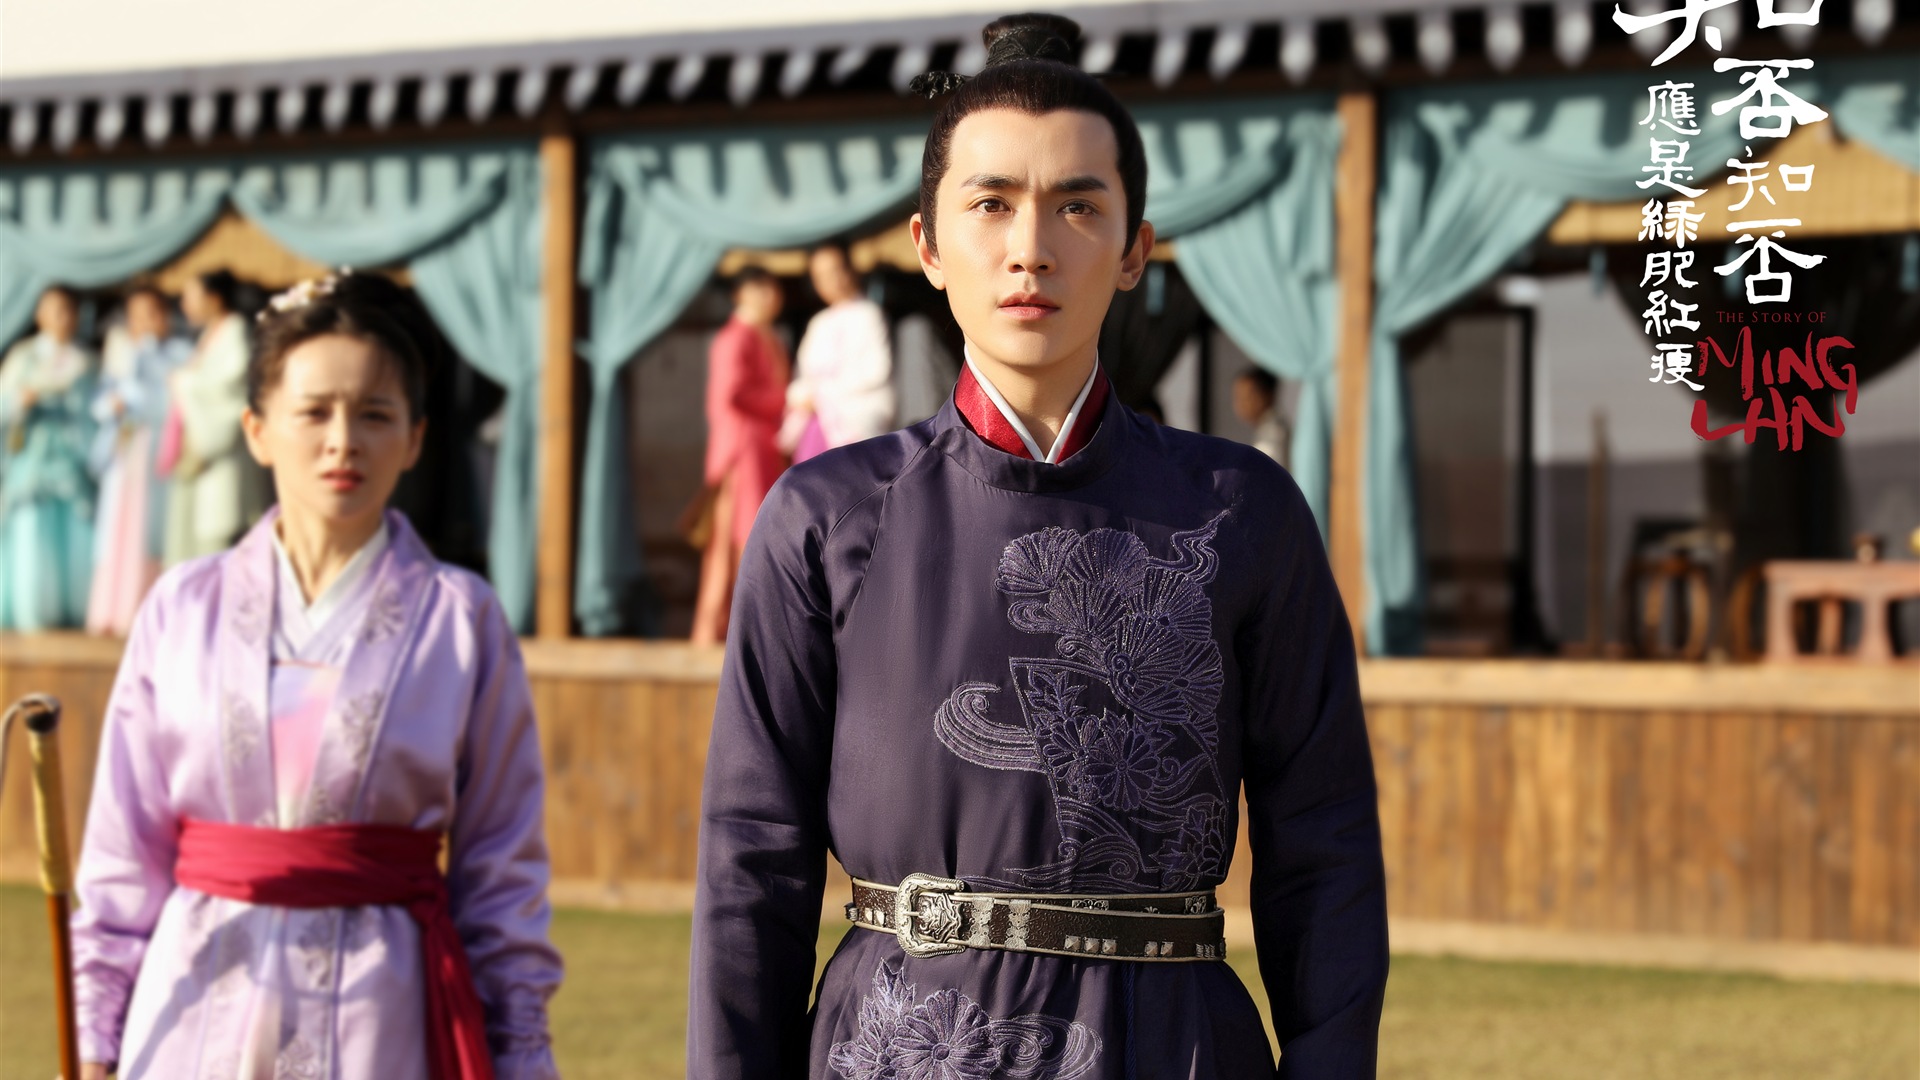 The Story Of MingLan, TV series HD wallpapers #38 - 1920x1080